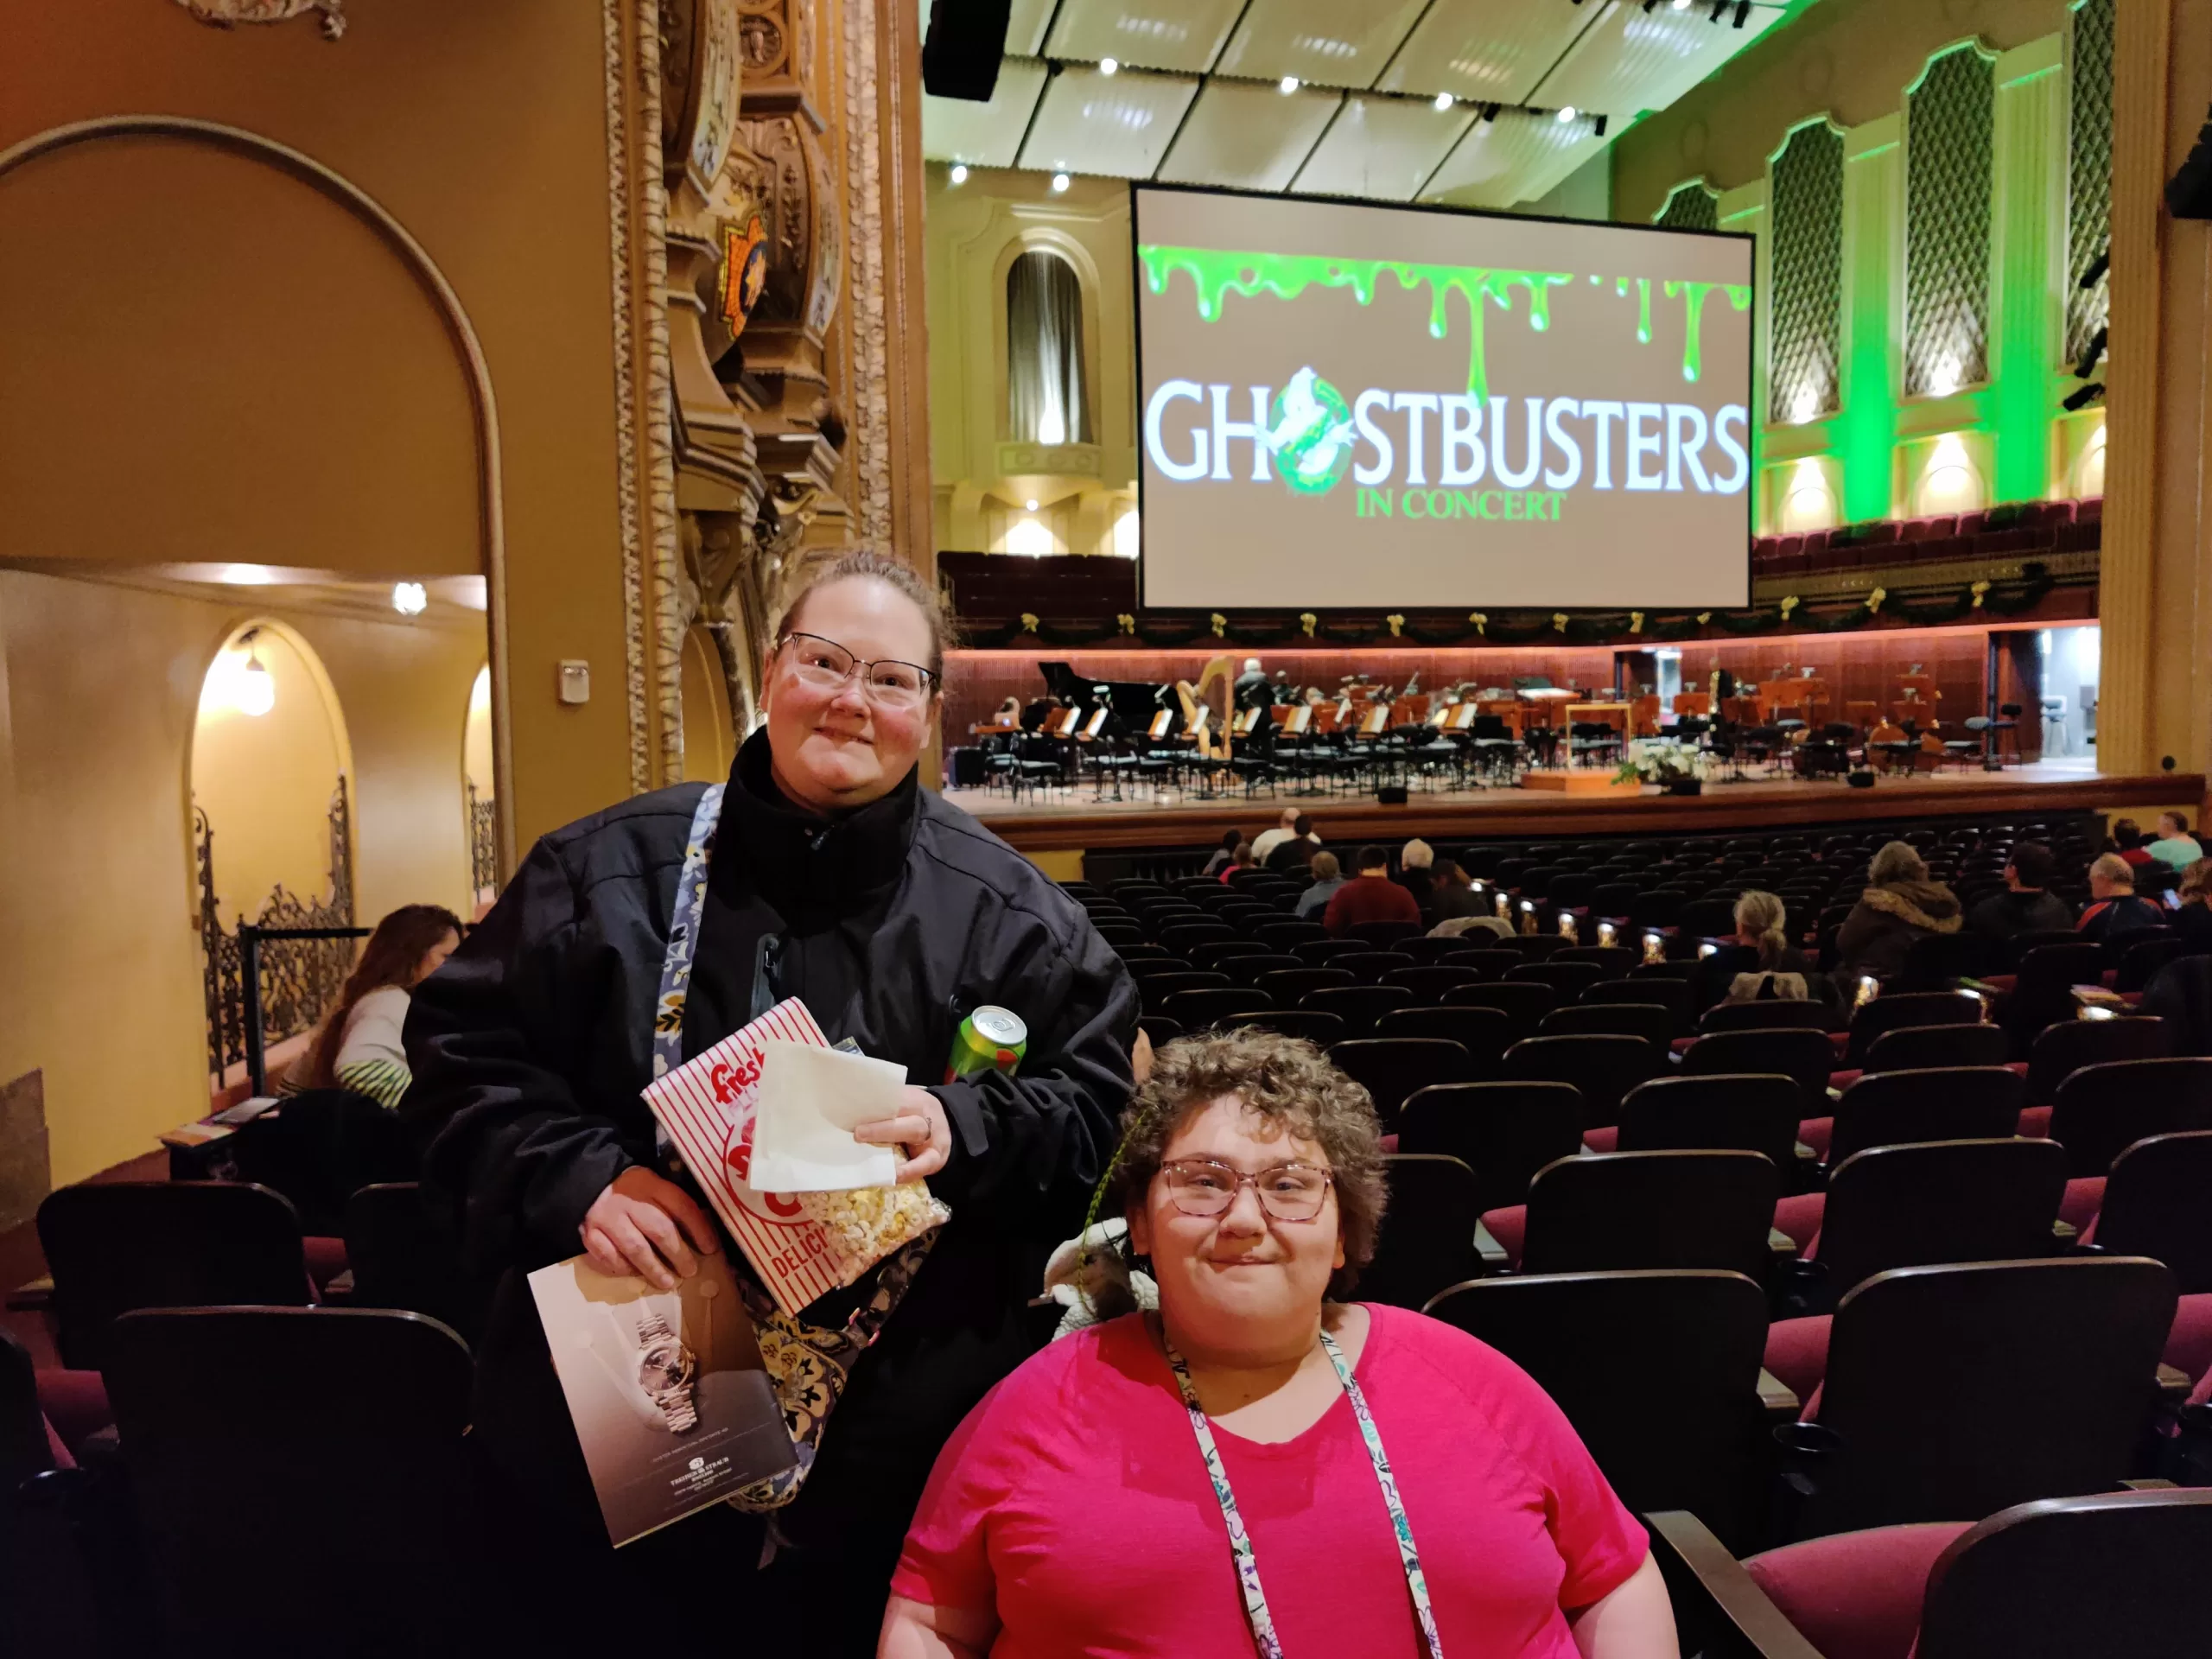 Ghostbusters in concert